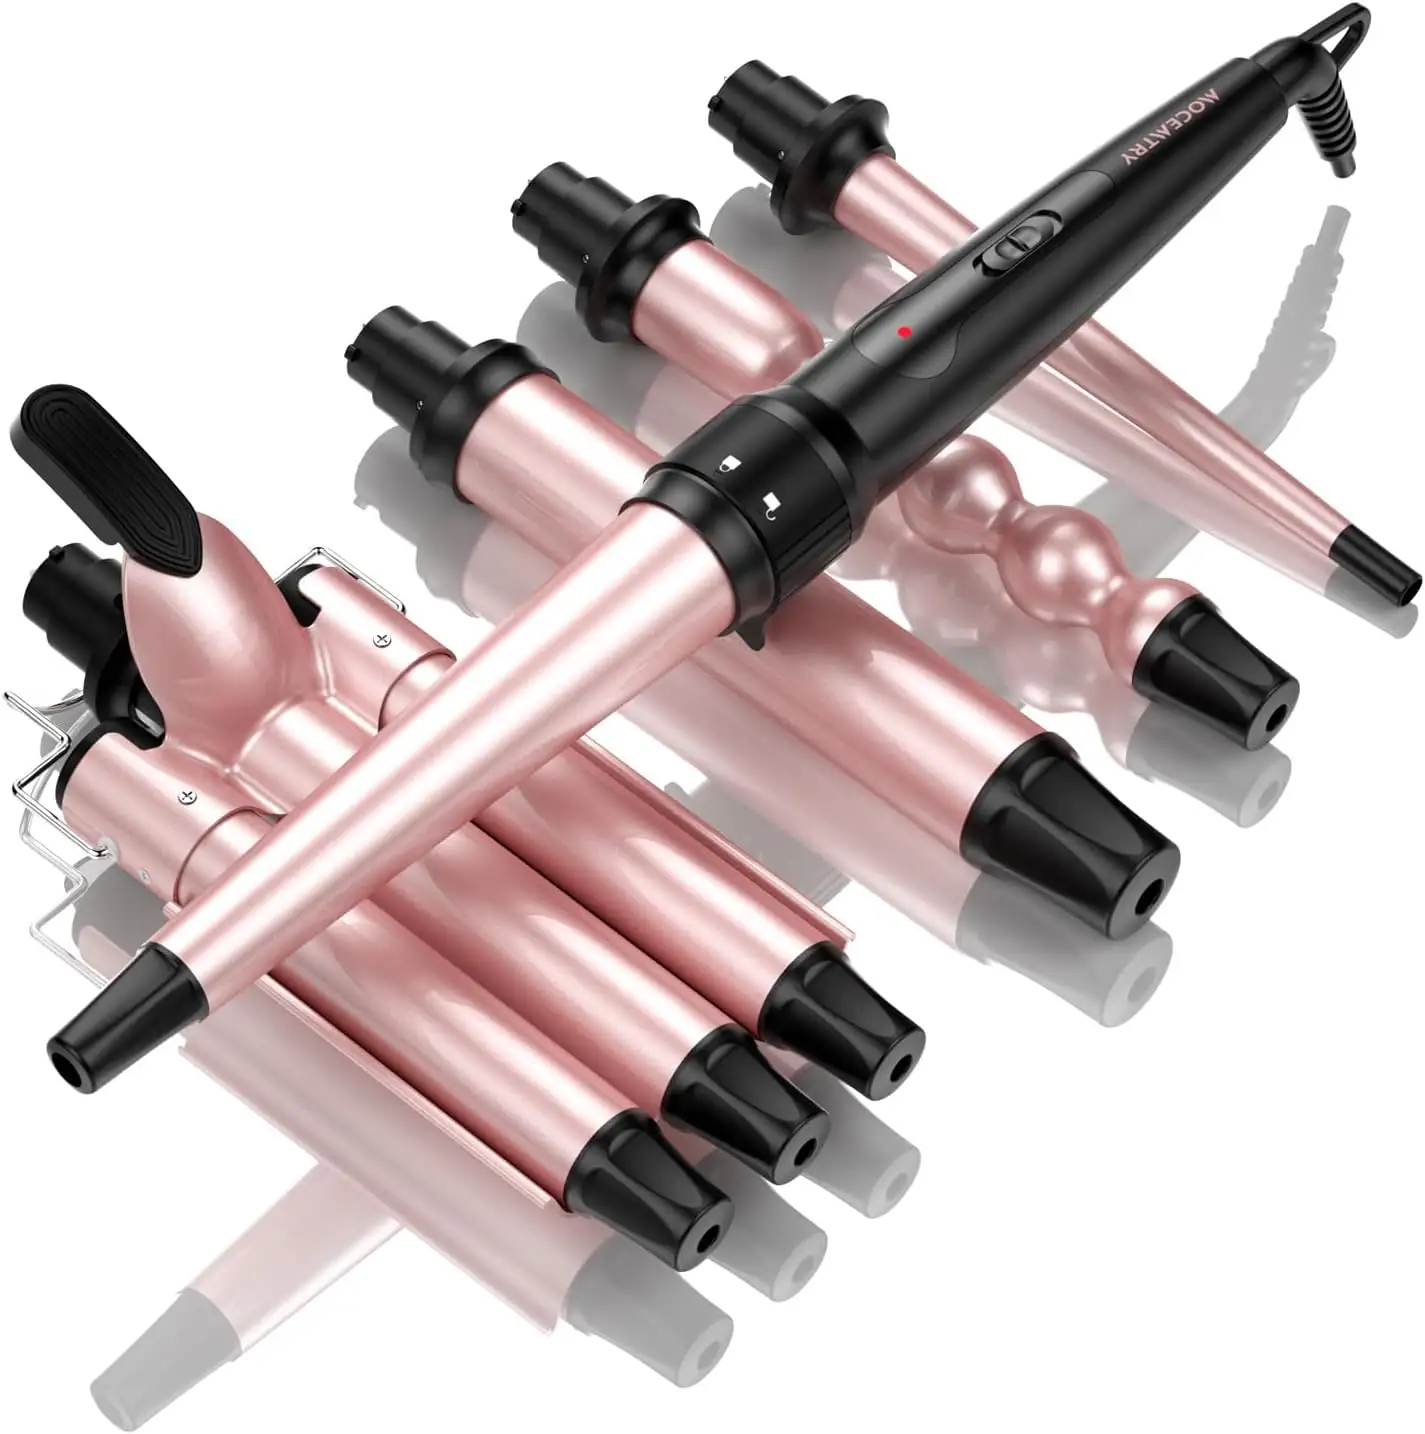 Curling Iron  5 in 1 Curling Wand Set with 3 Barrel Hair Crimper   Hair Curler Interchangeable Ceramic Barrels  Dual Voltage